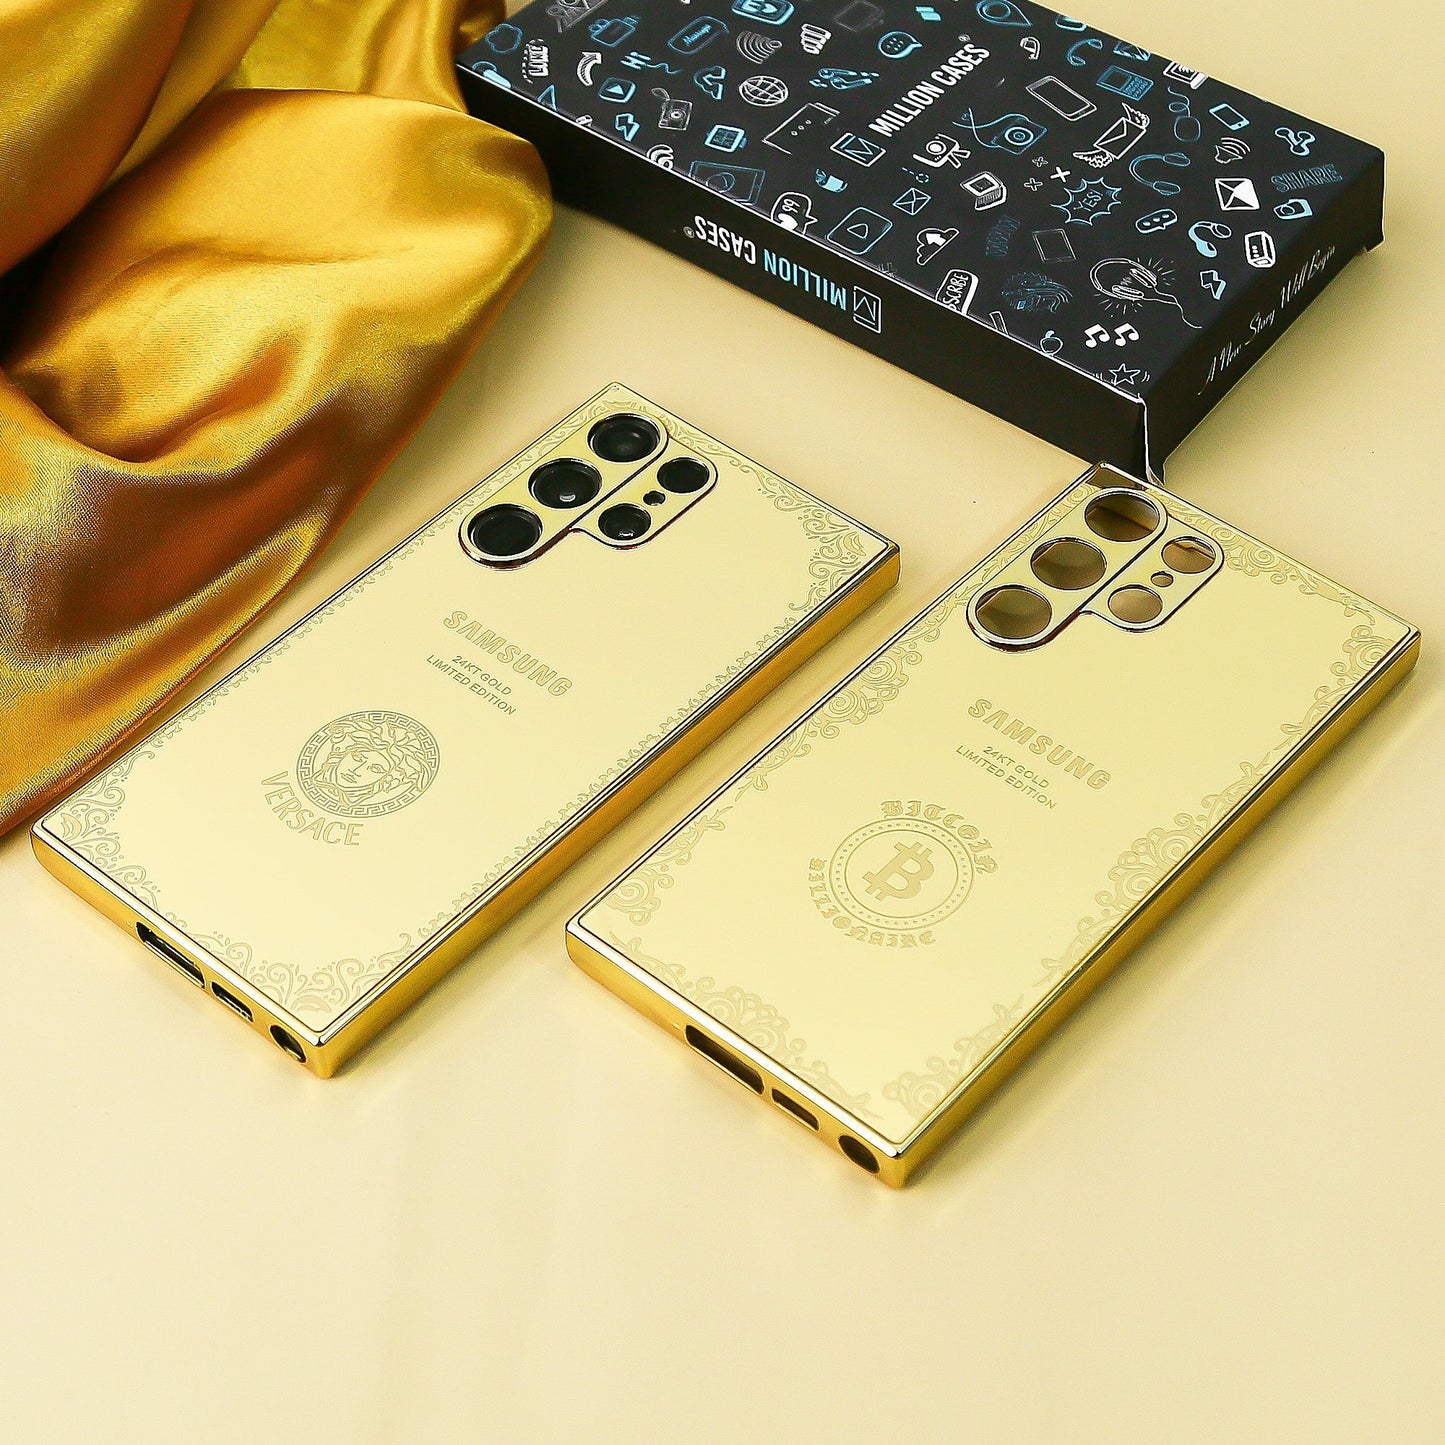 Limited Edition Gold Crafted Versace Case - Samsung